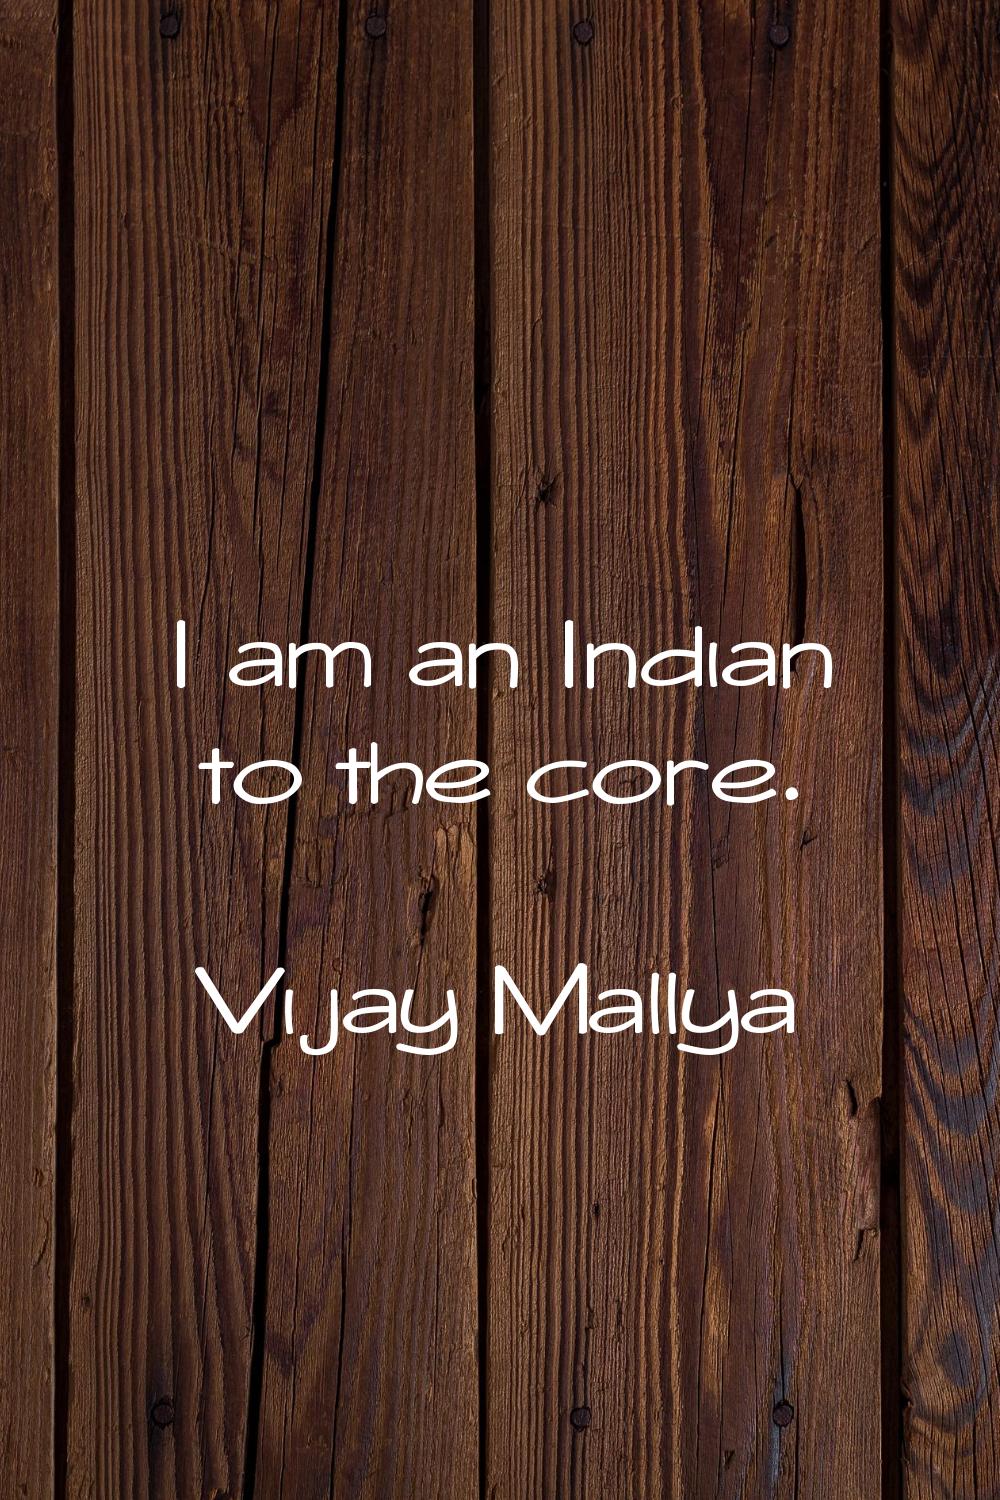 I am an Indian to the core.